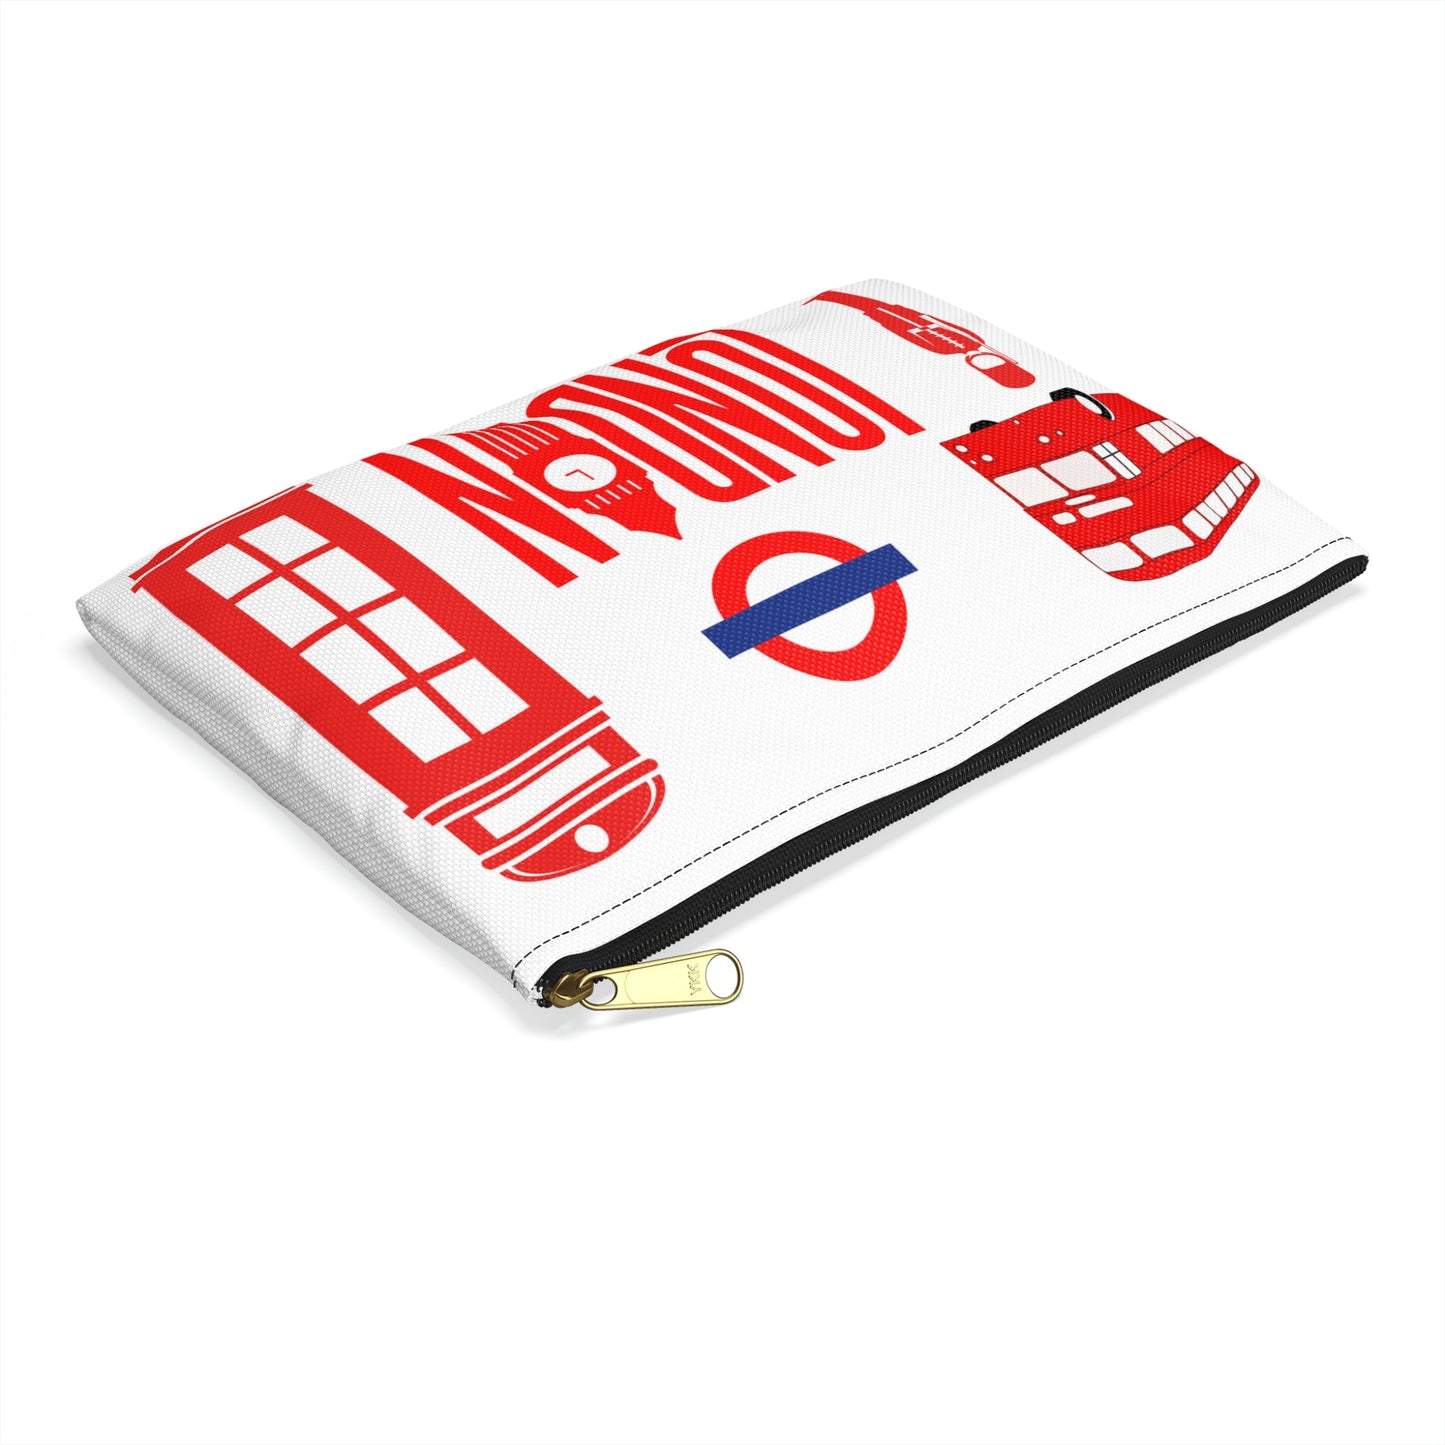 London Accessory Pouch, Phone Booth Bag